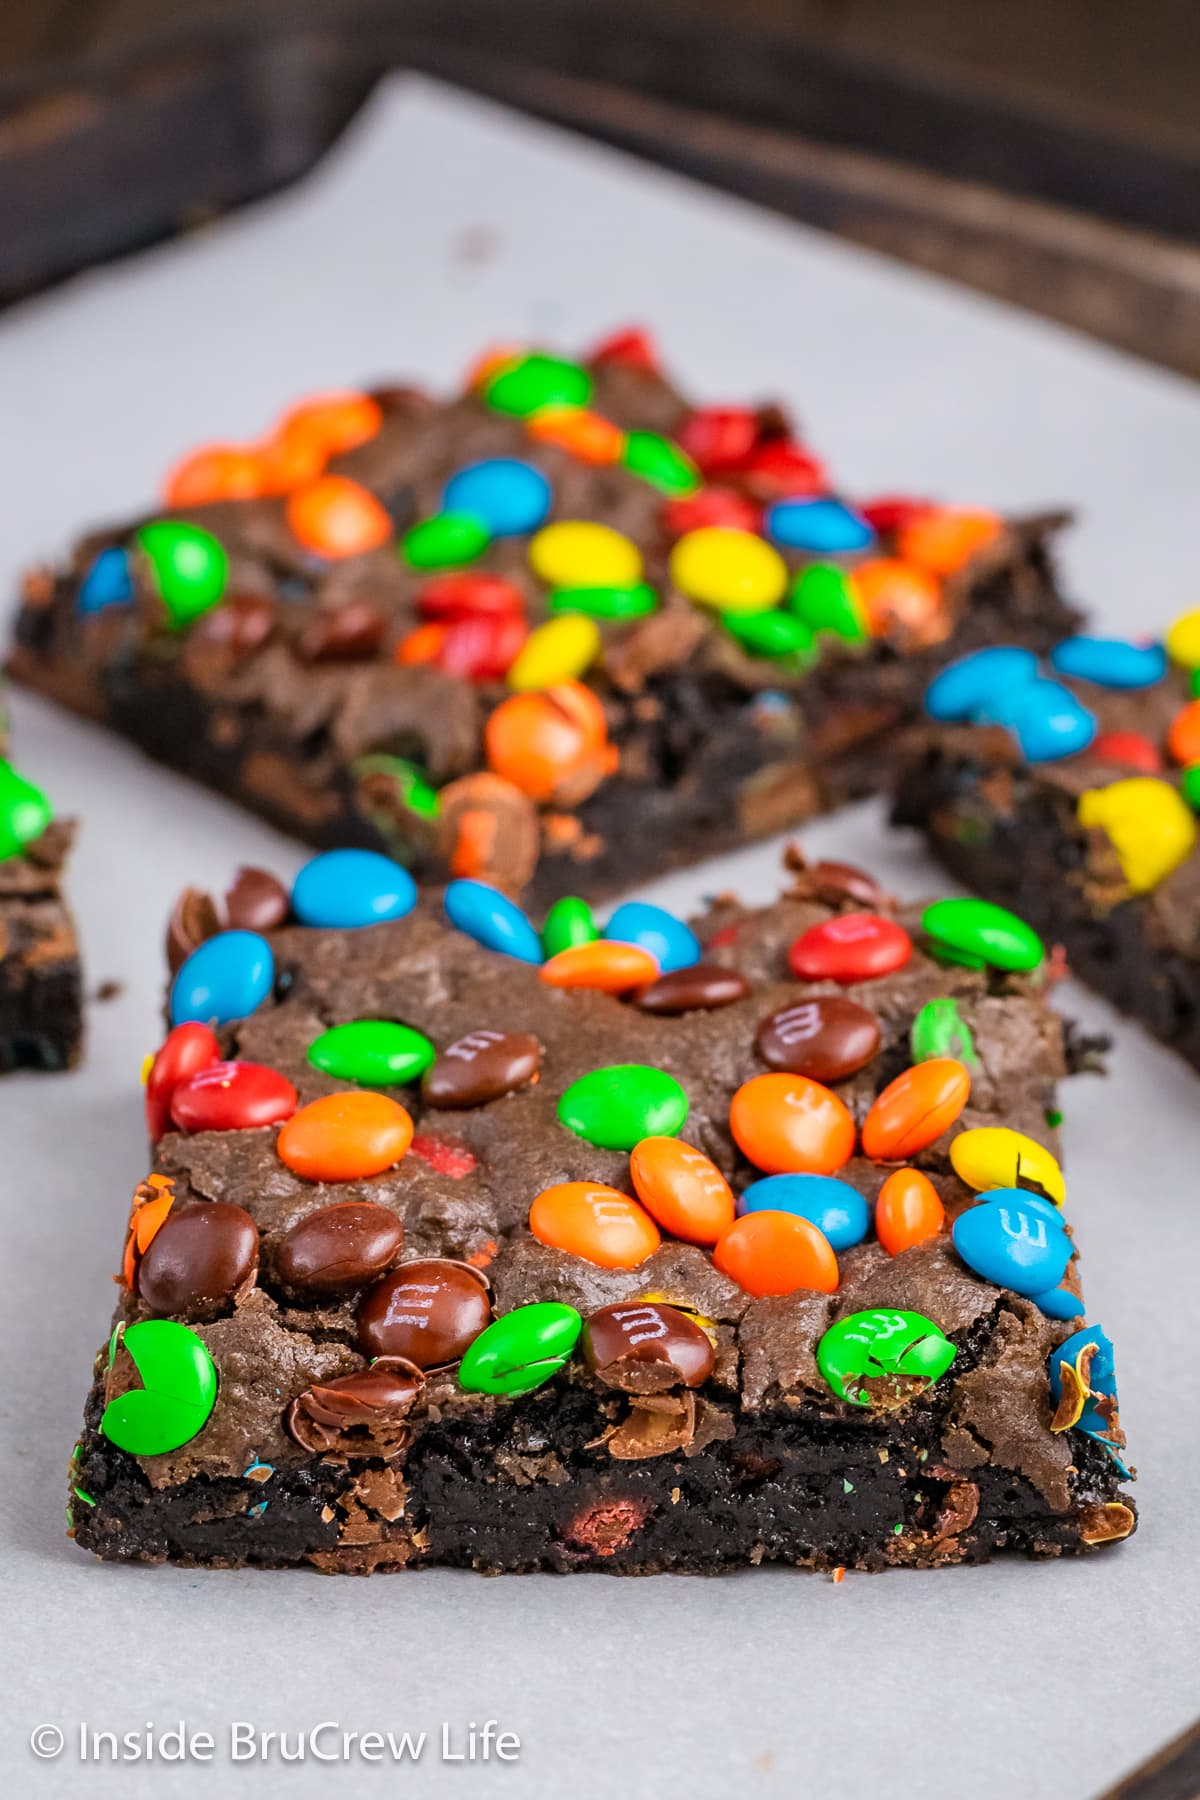 Brownies topped with colorful candies on a paper lined tray.